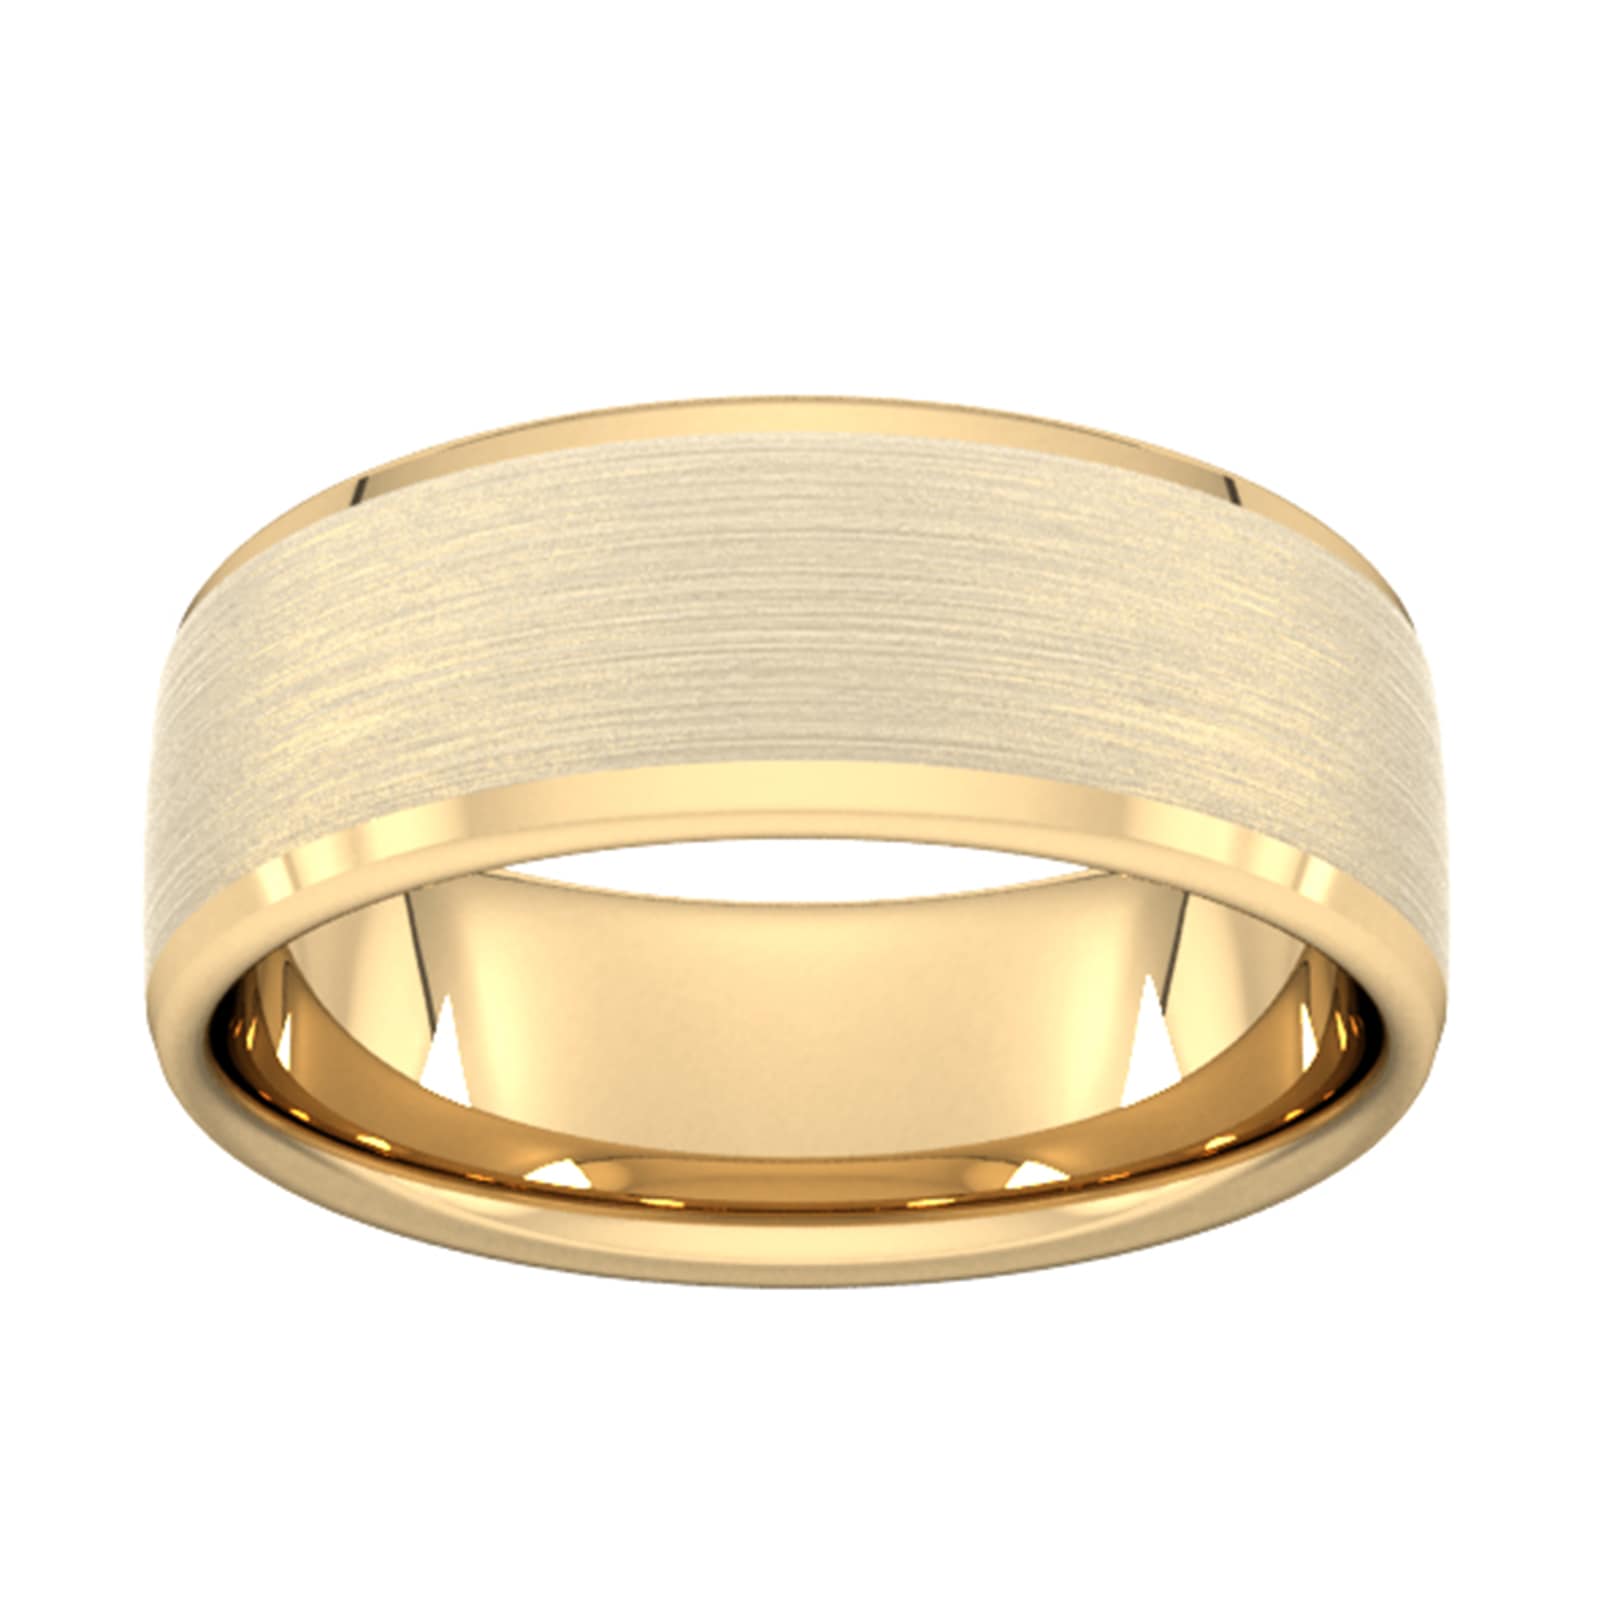 8mm Slight Court Extra Heavy Polished Chamfered Edges With Matt Centre Wedding Ring In 18 Carat Yellow Gold - Ring Size L